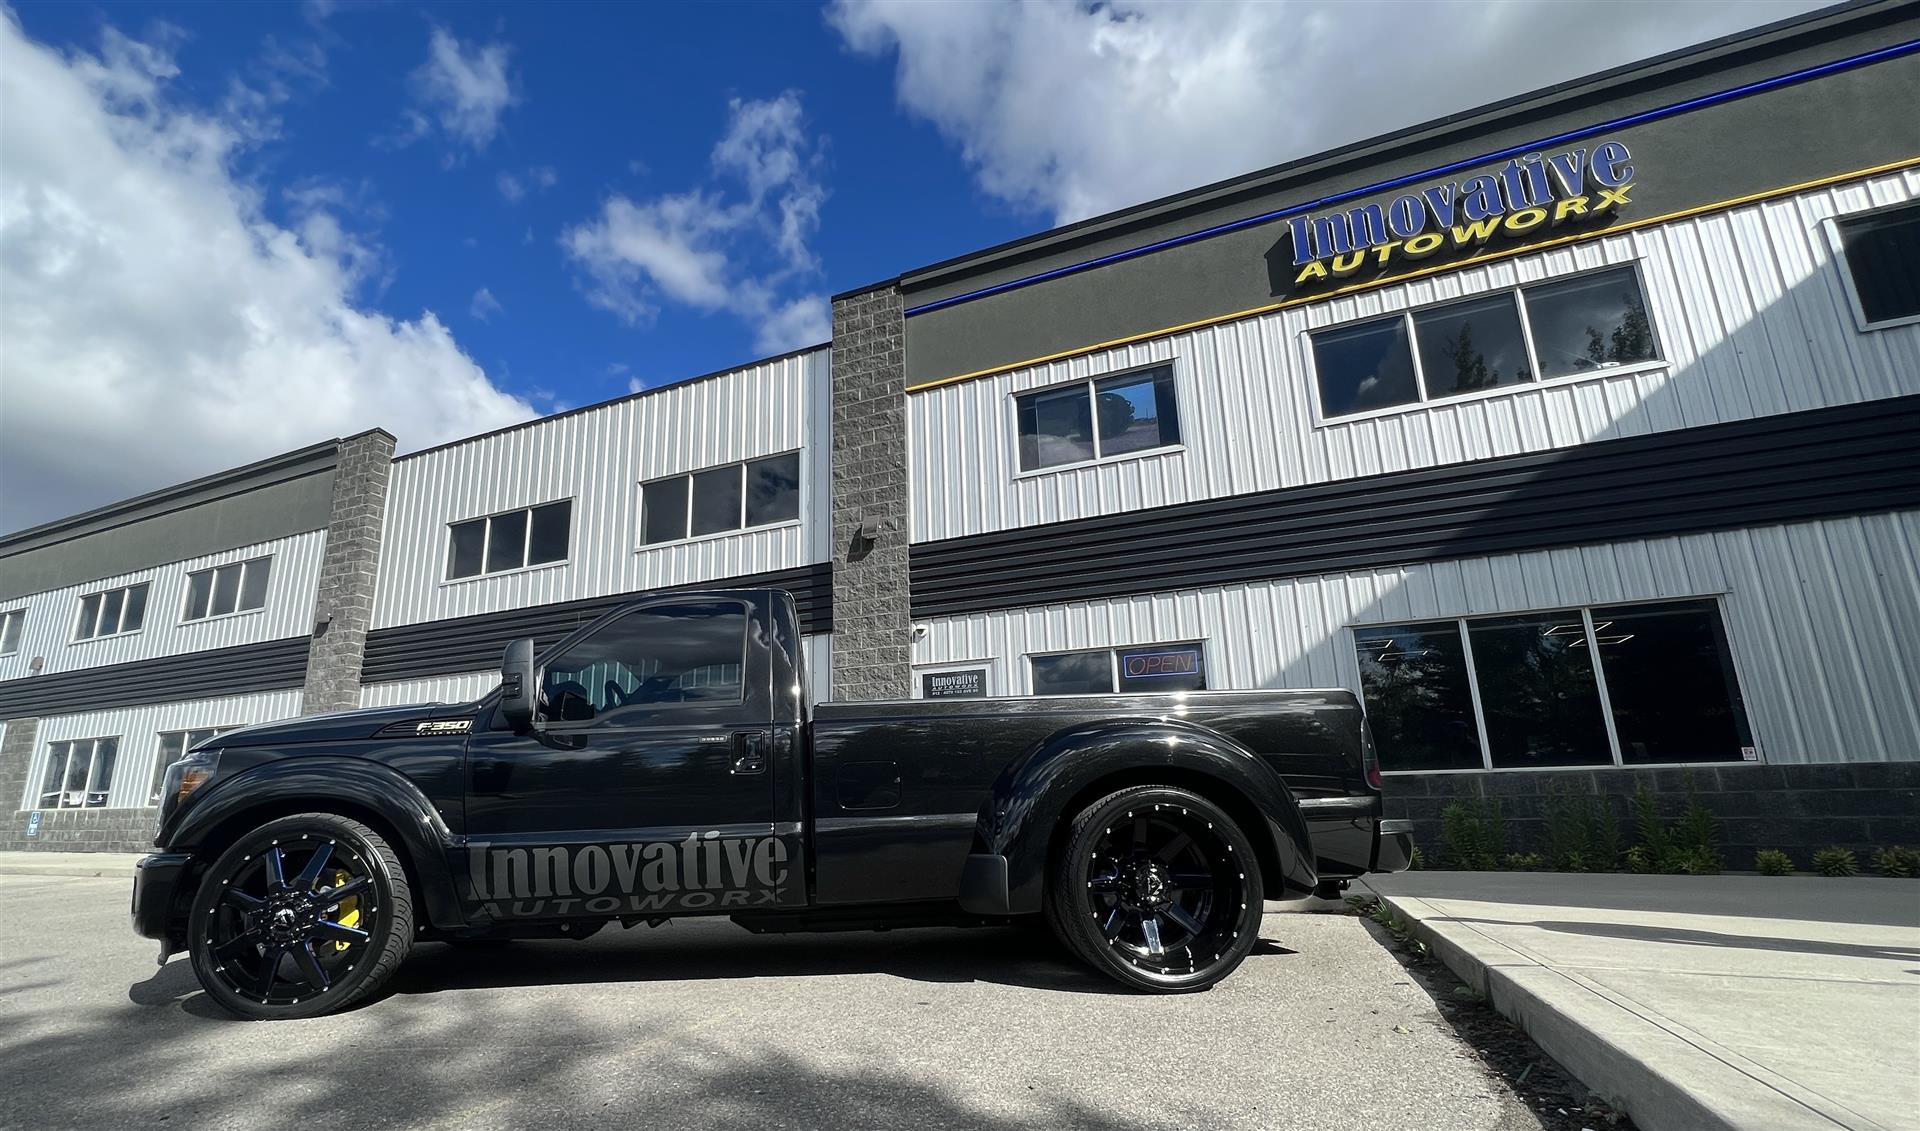 Truck parked in front of the Innovative Autoworx storefront.